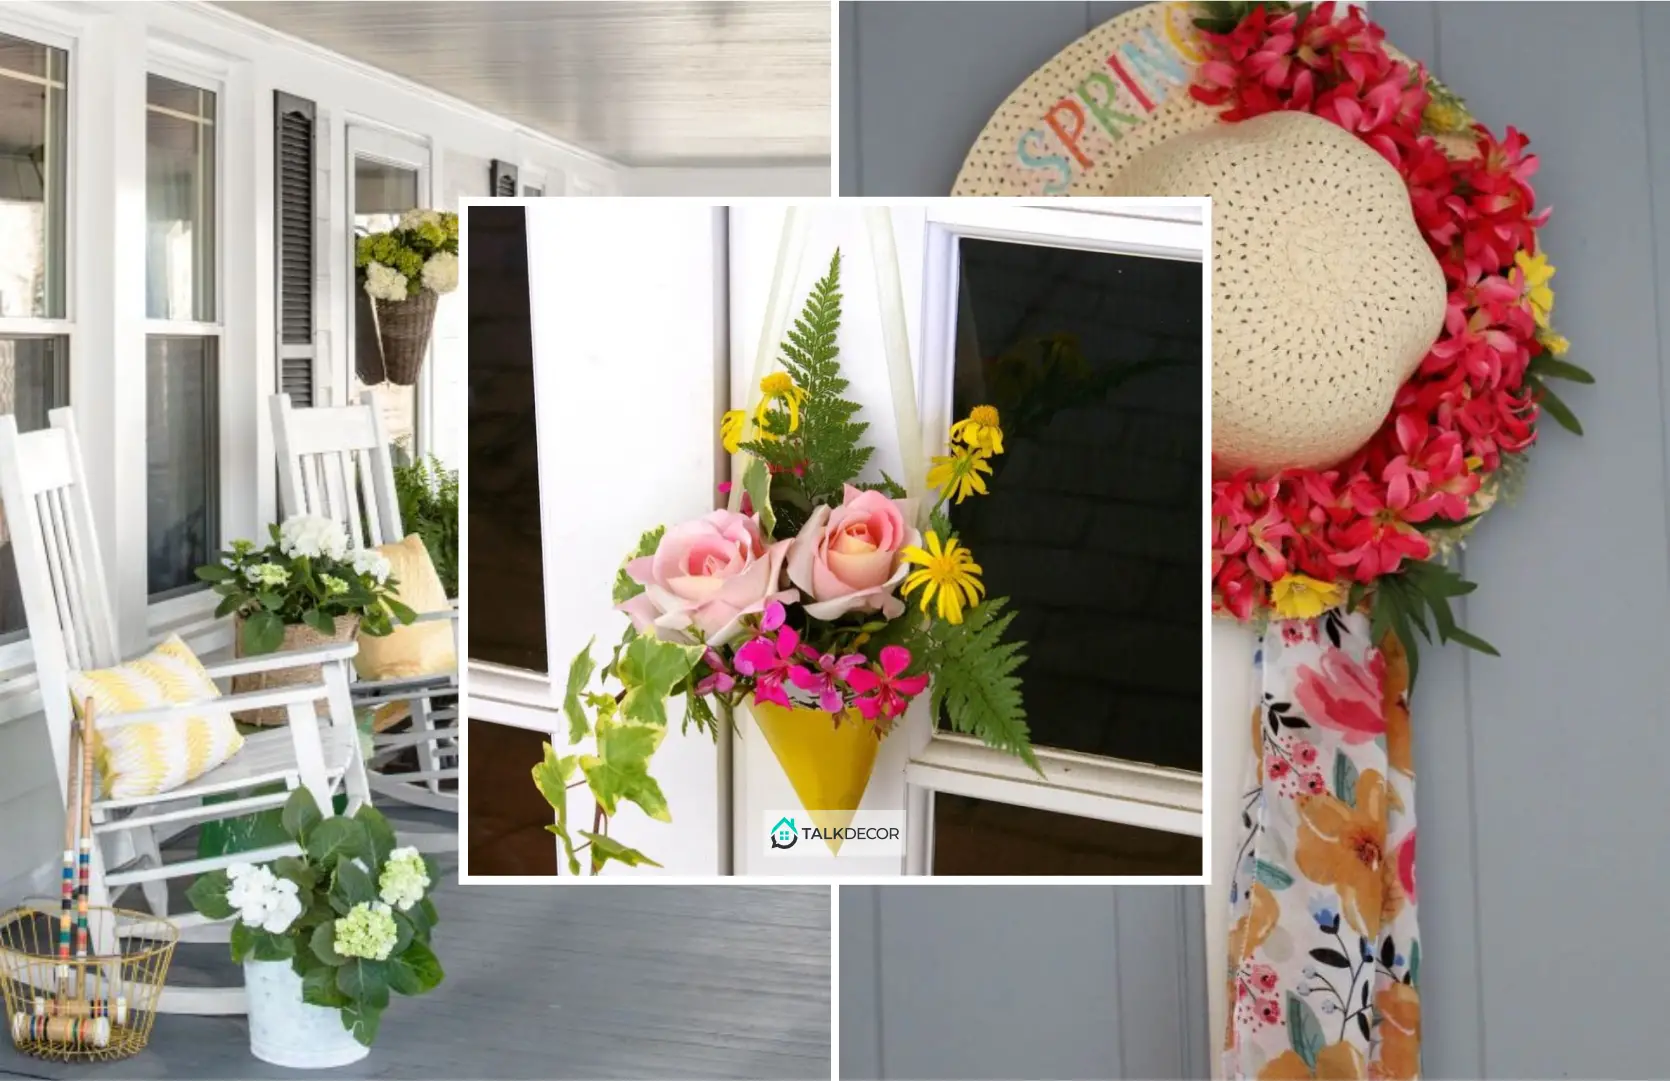 How to Give Spring Touches to Your Door